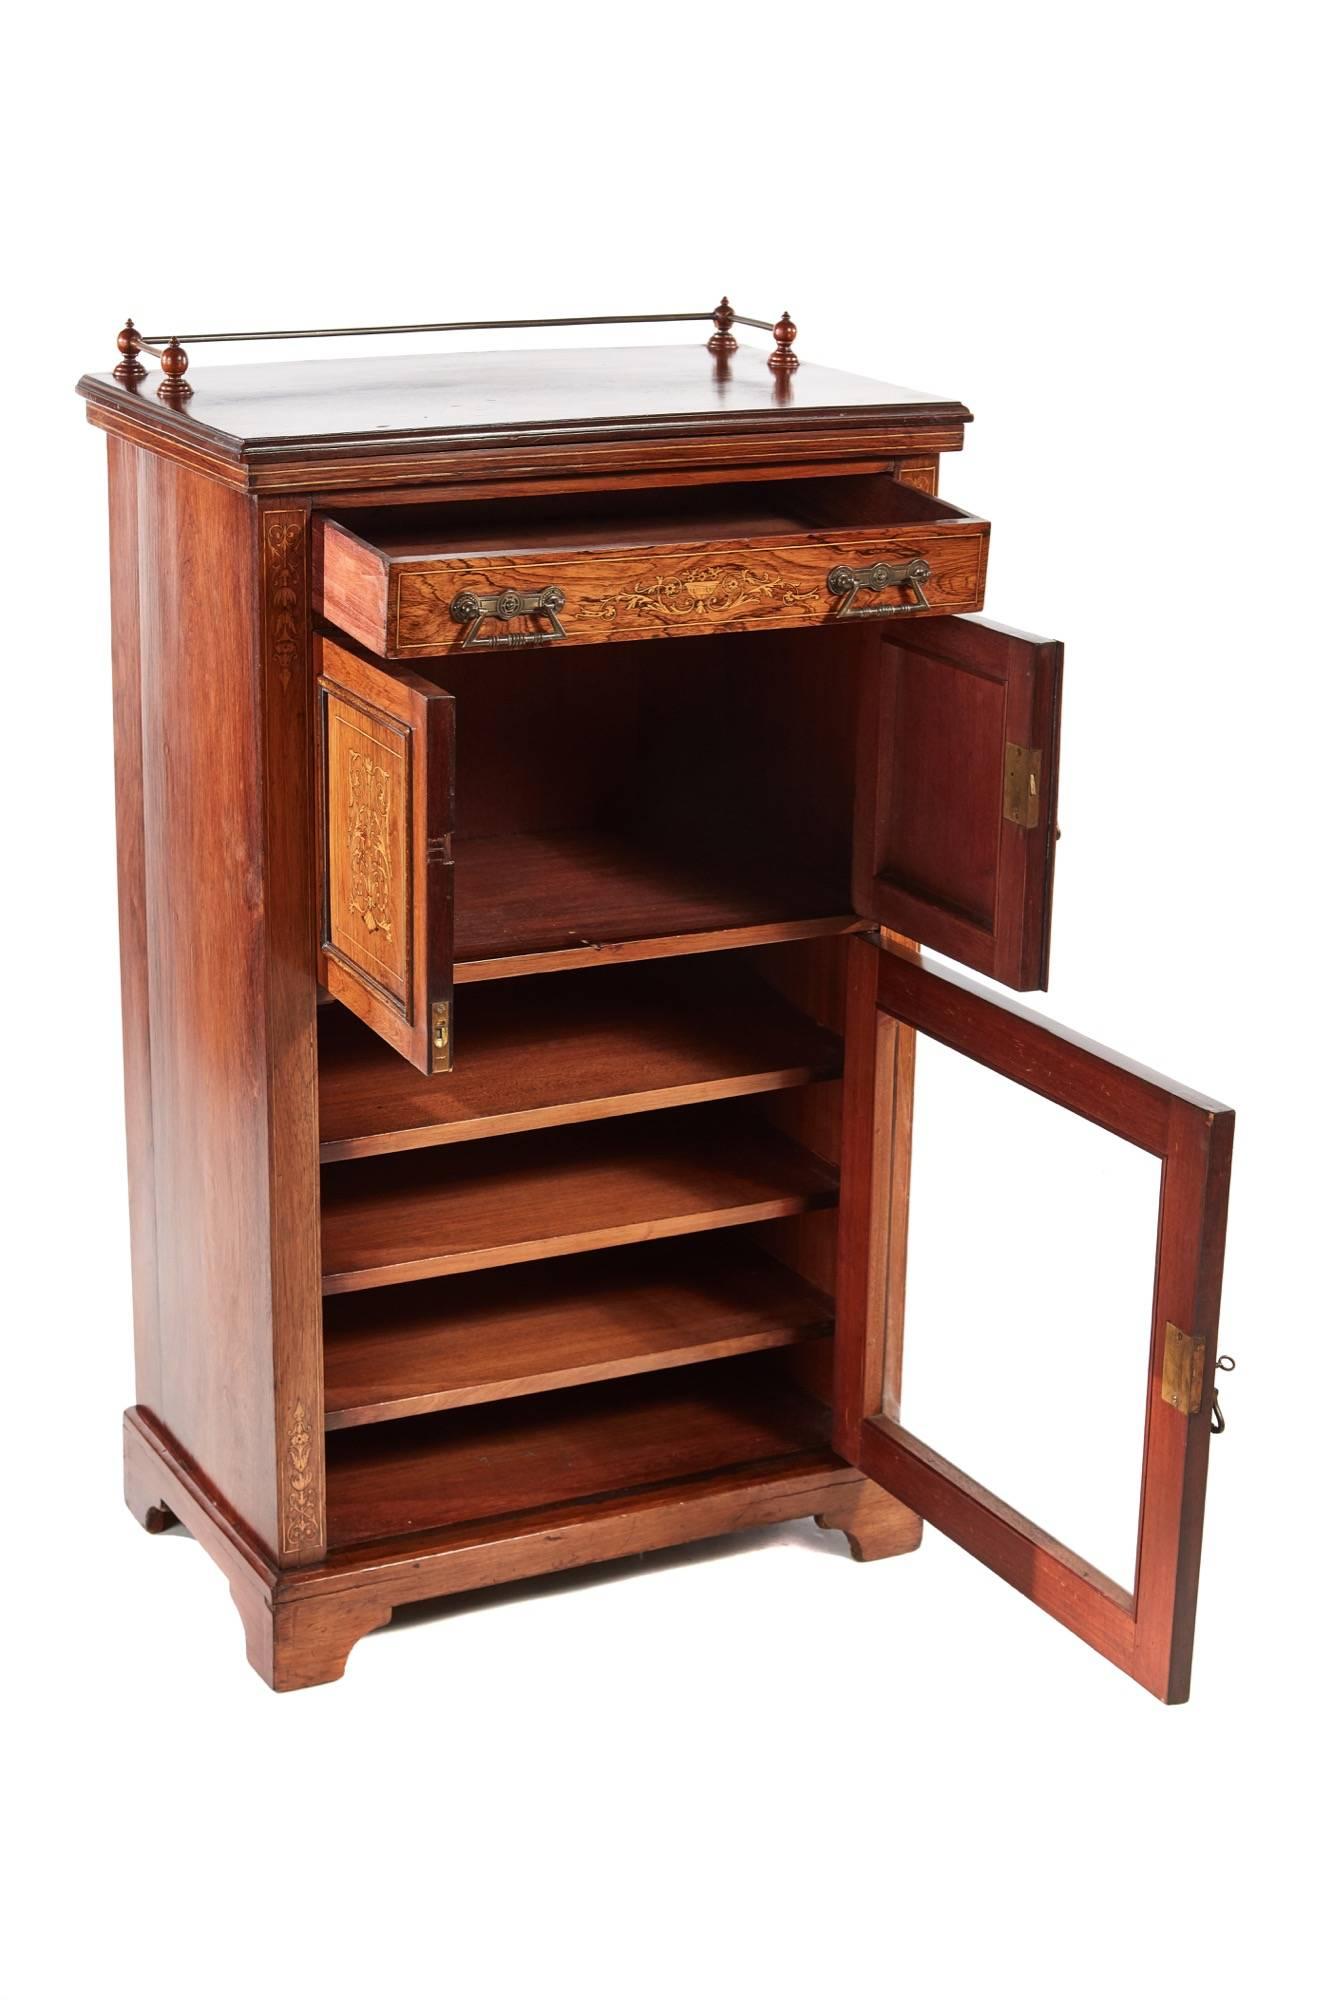 Good quality rosewood inlaid music cabinet, having a brass gallery, lovely inlaid rosewood top, one inlaid drawer with original brass handles, two inlaid doors and one glazed door original brass handles, standing on a shaped plinth base, original